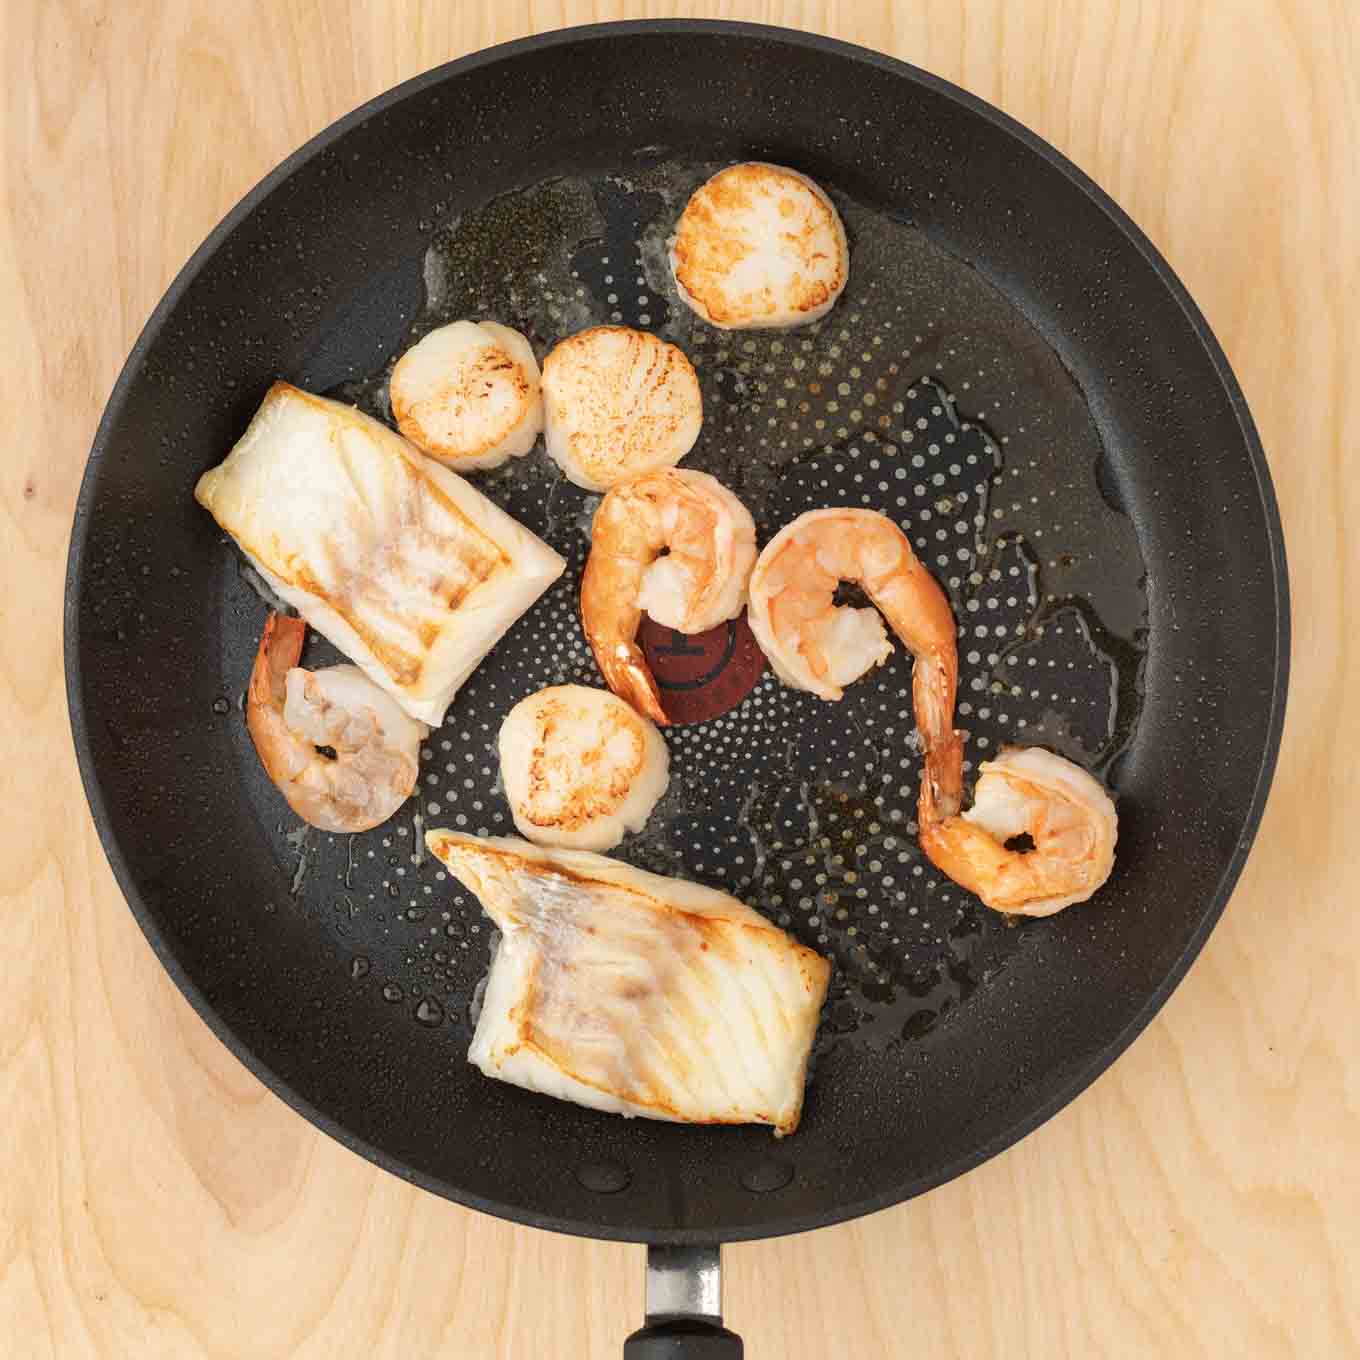 fish, shrimp and scallops in a pan cooking